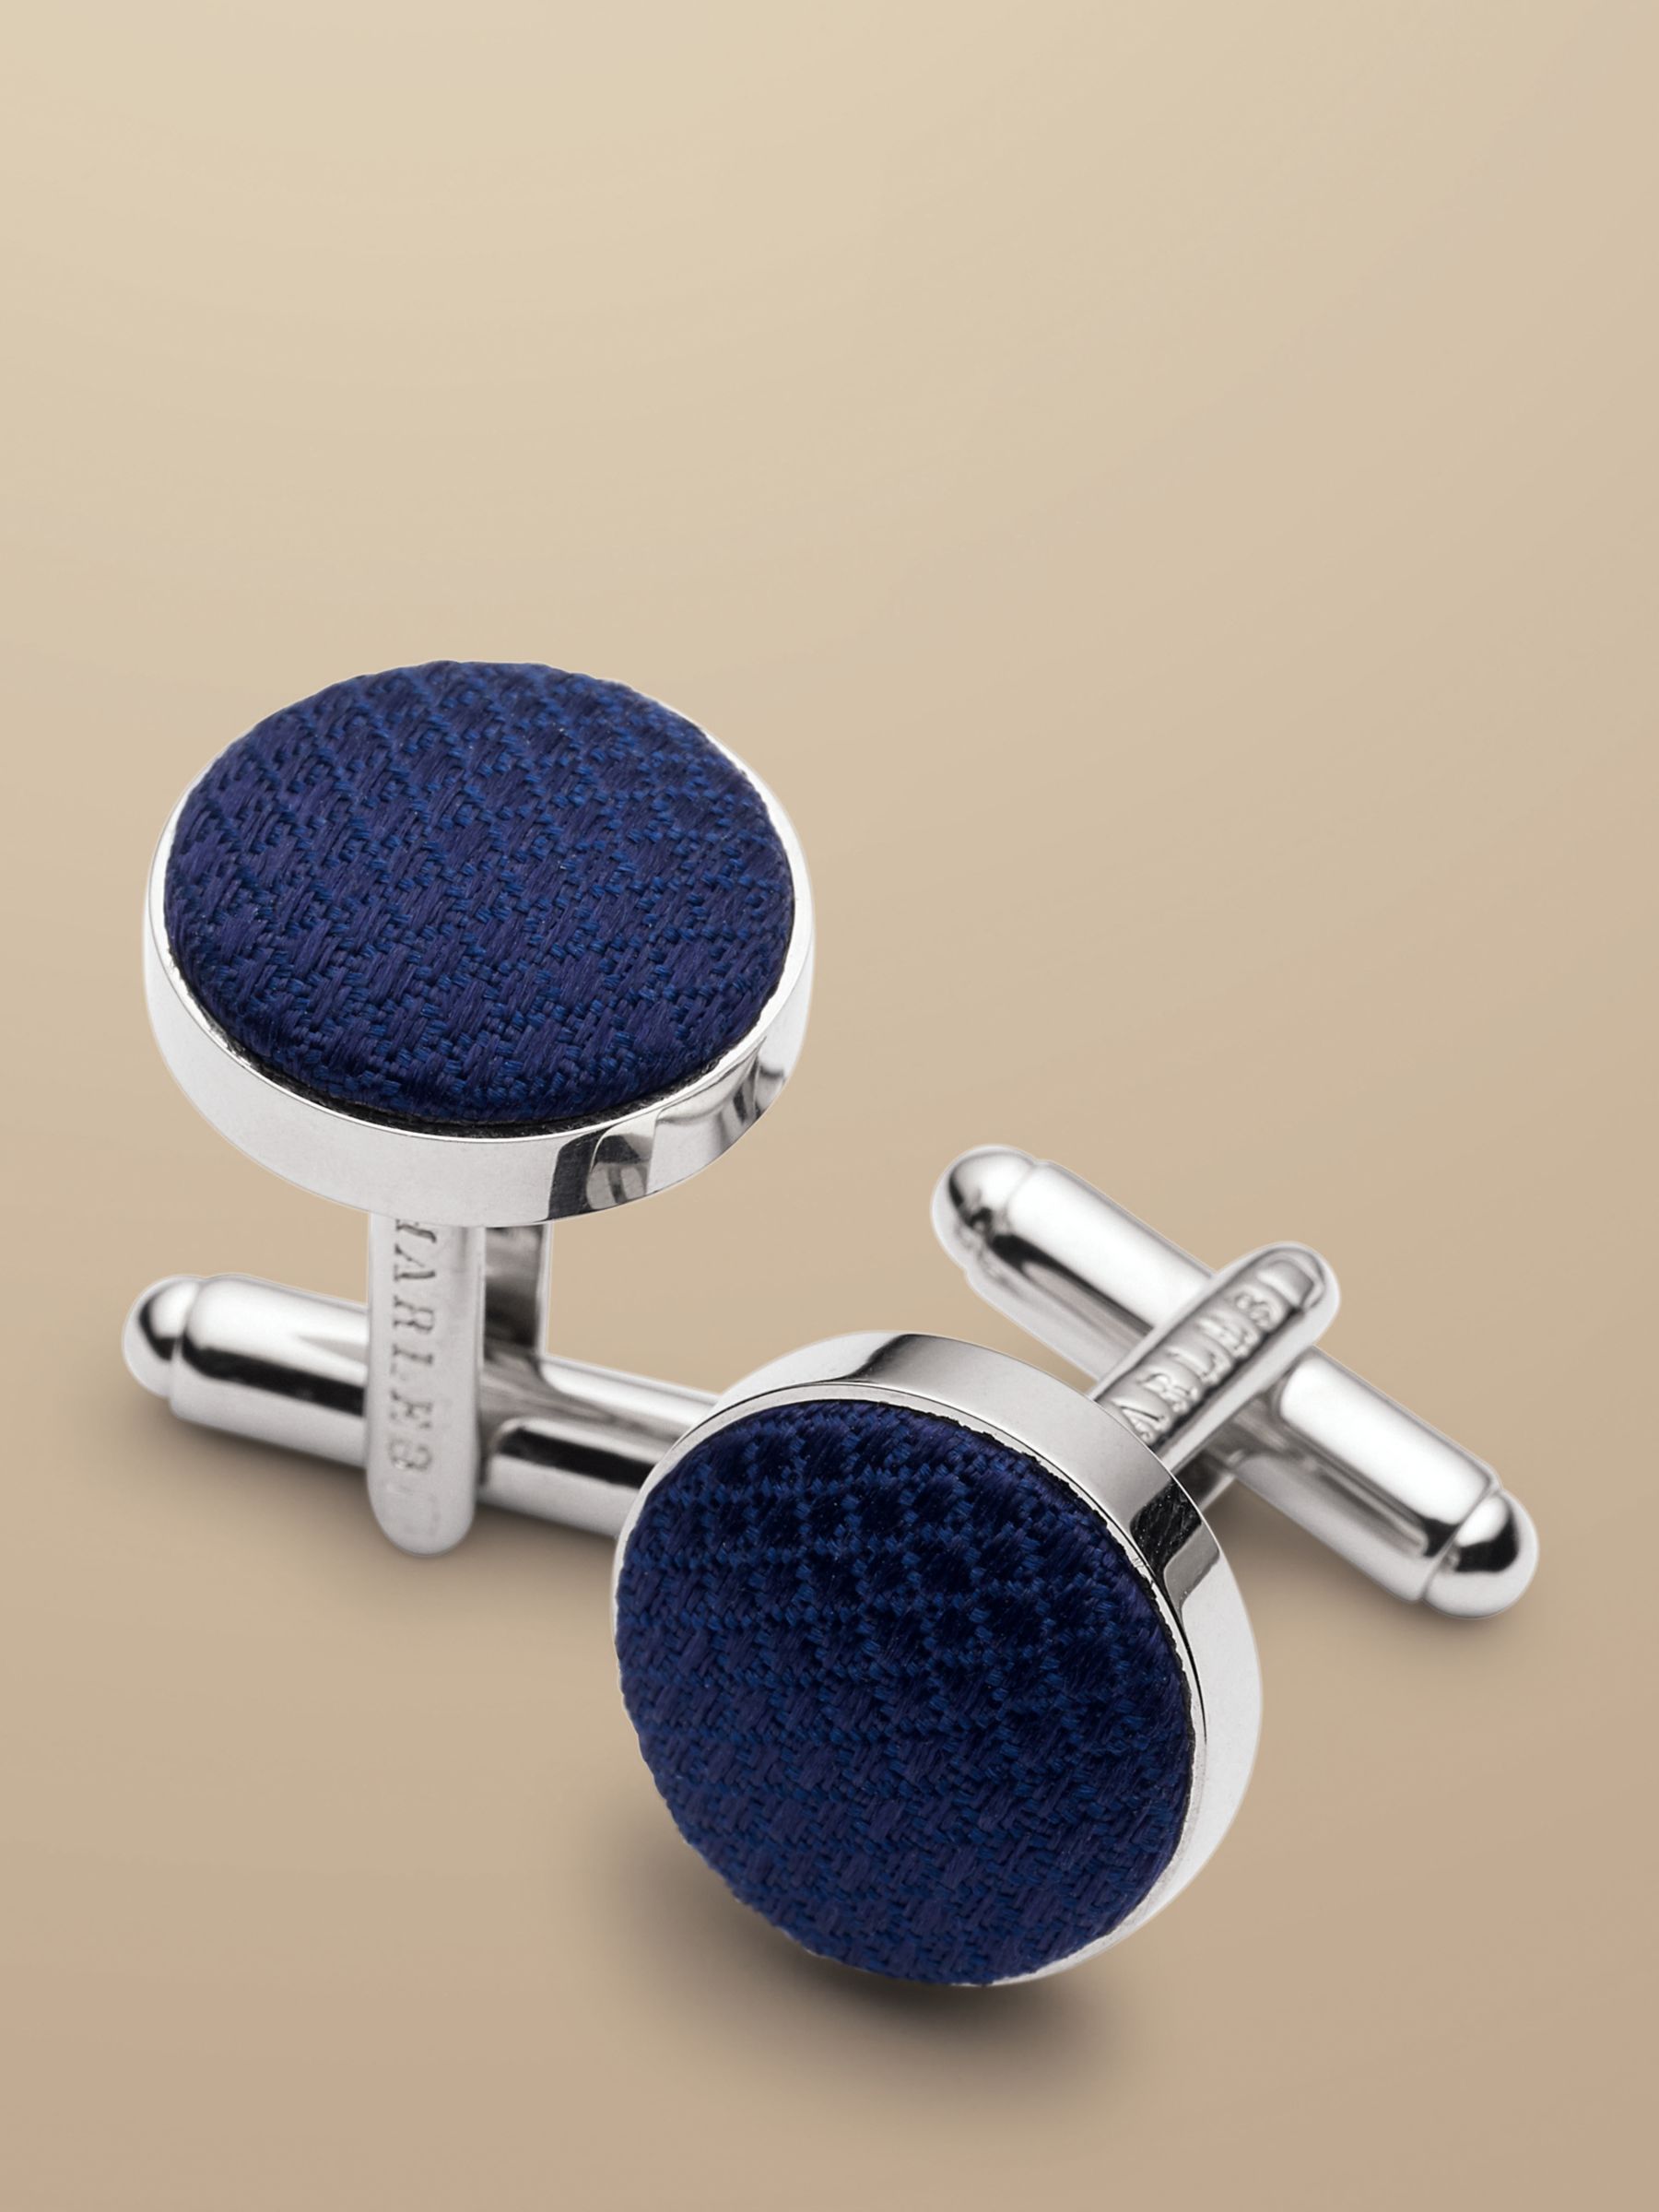 7 Different types of Mens Cufflinks that suit you